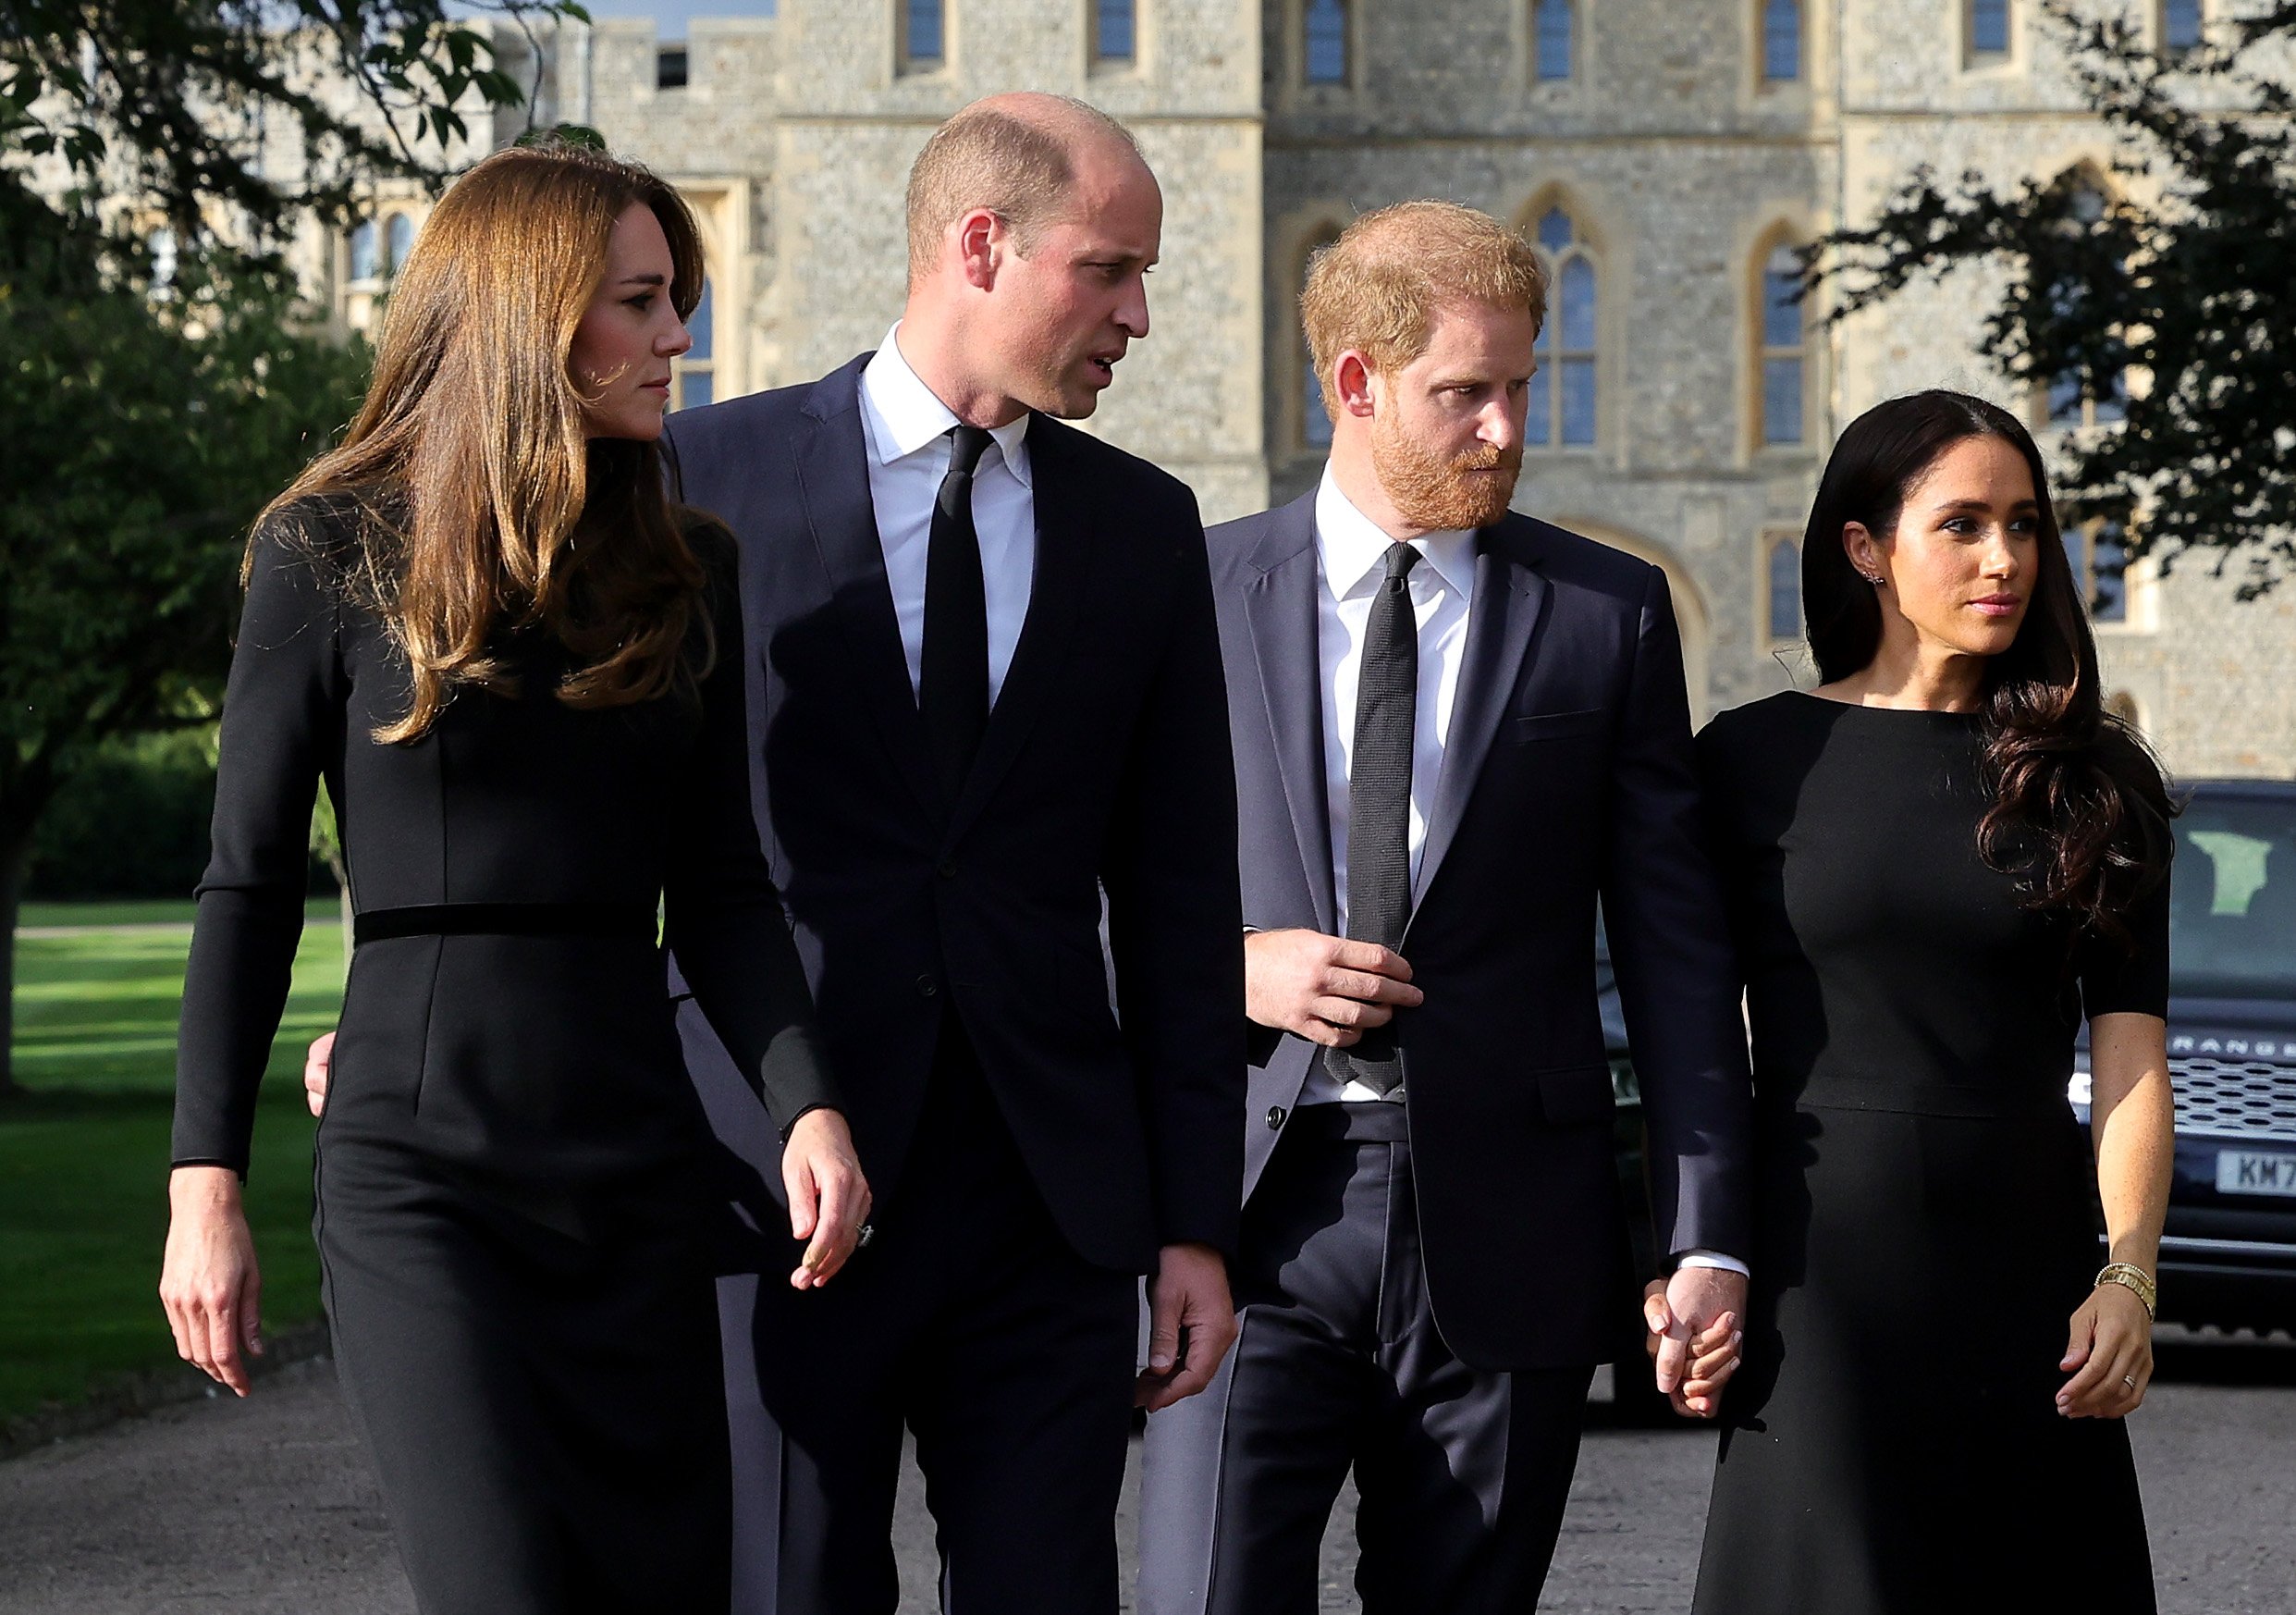 Kate Middleton and Prince William walk alongside Prince Harry and Meghan Markle during the walkabout before the funeral of Queen Elizabeth II.